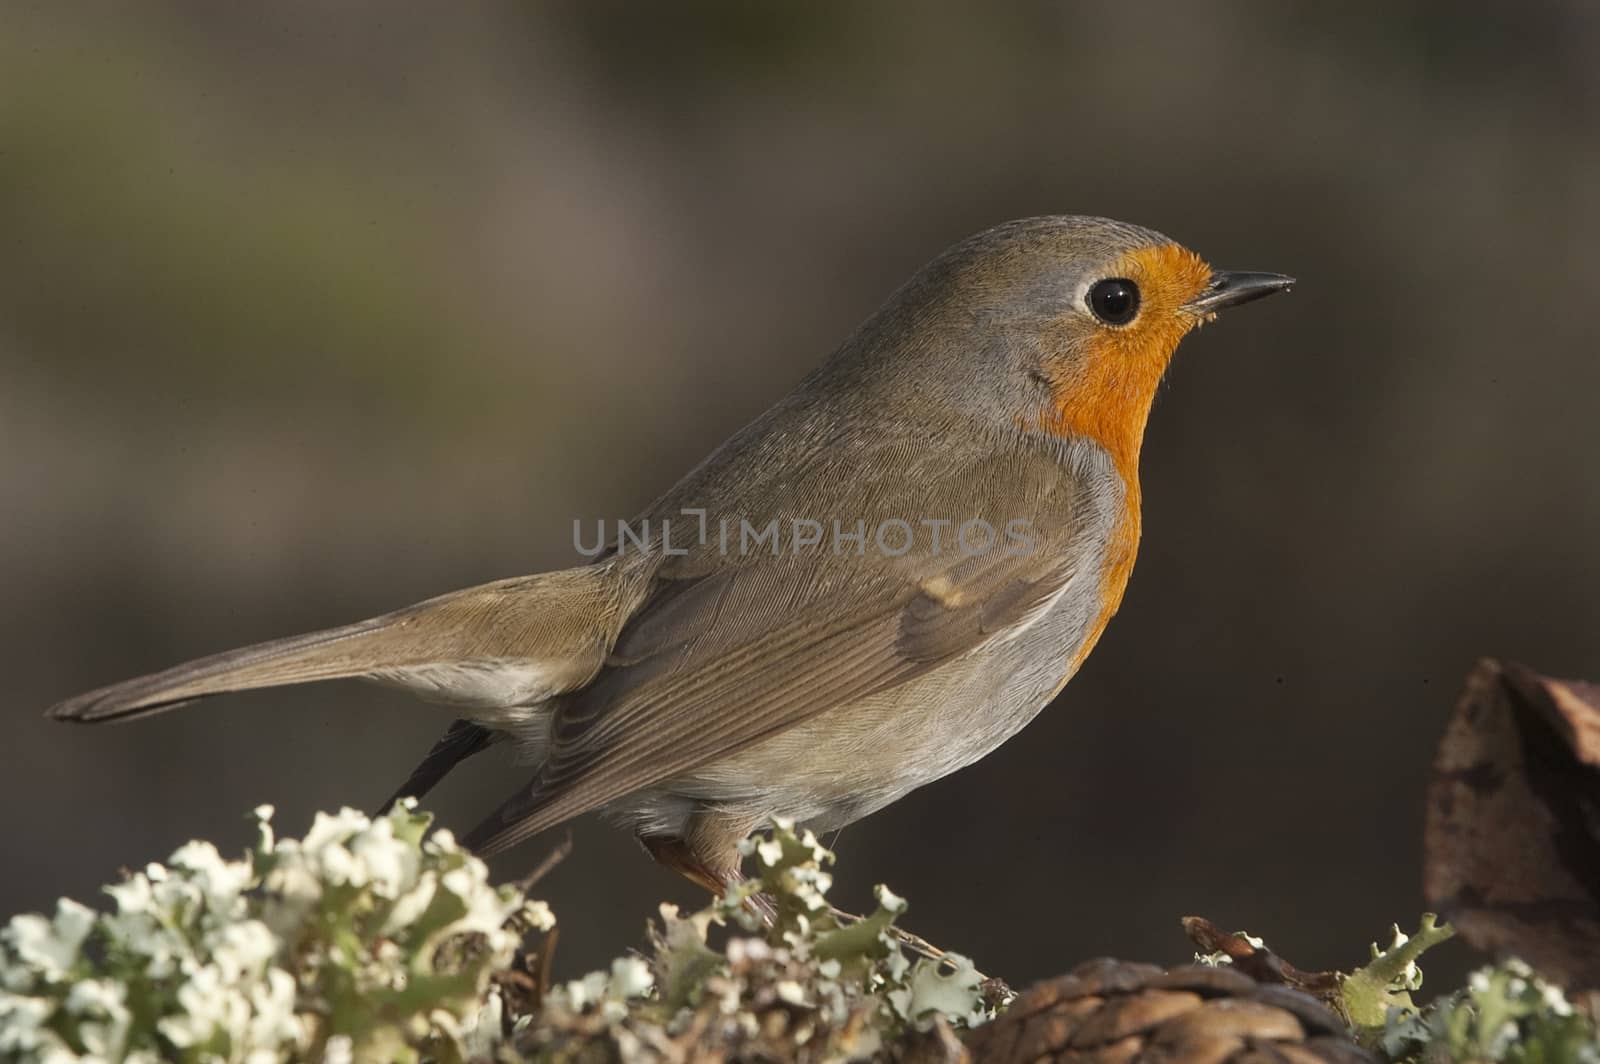 Robin - Erithacus rubecula, standing on the ground